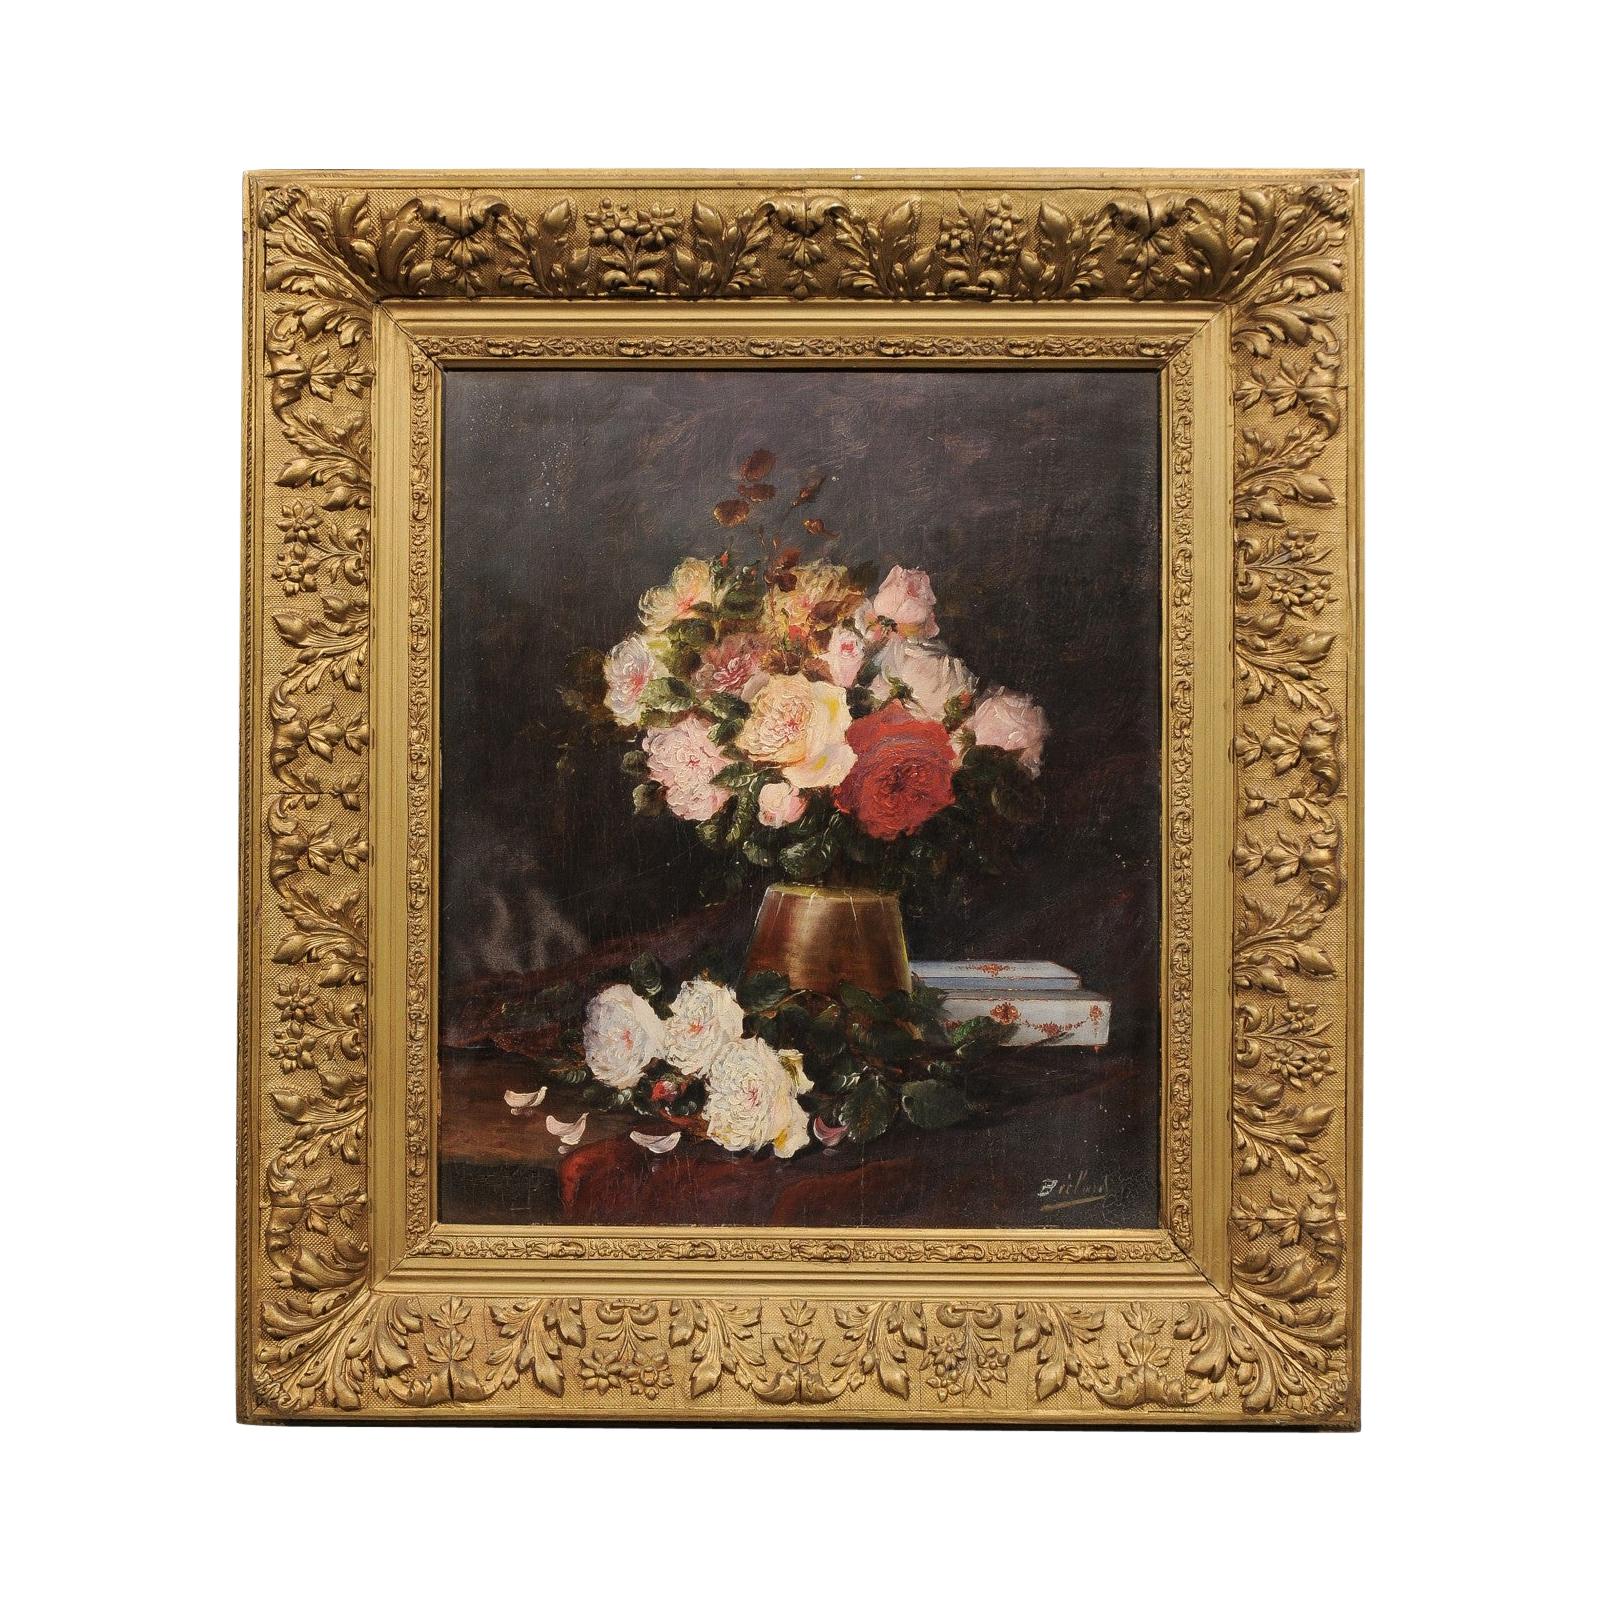 19th Century French Floral Still-Life Painting Depicting Roses in Original Frame